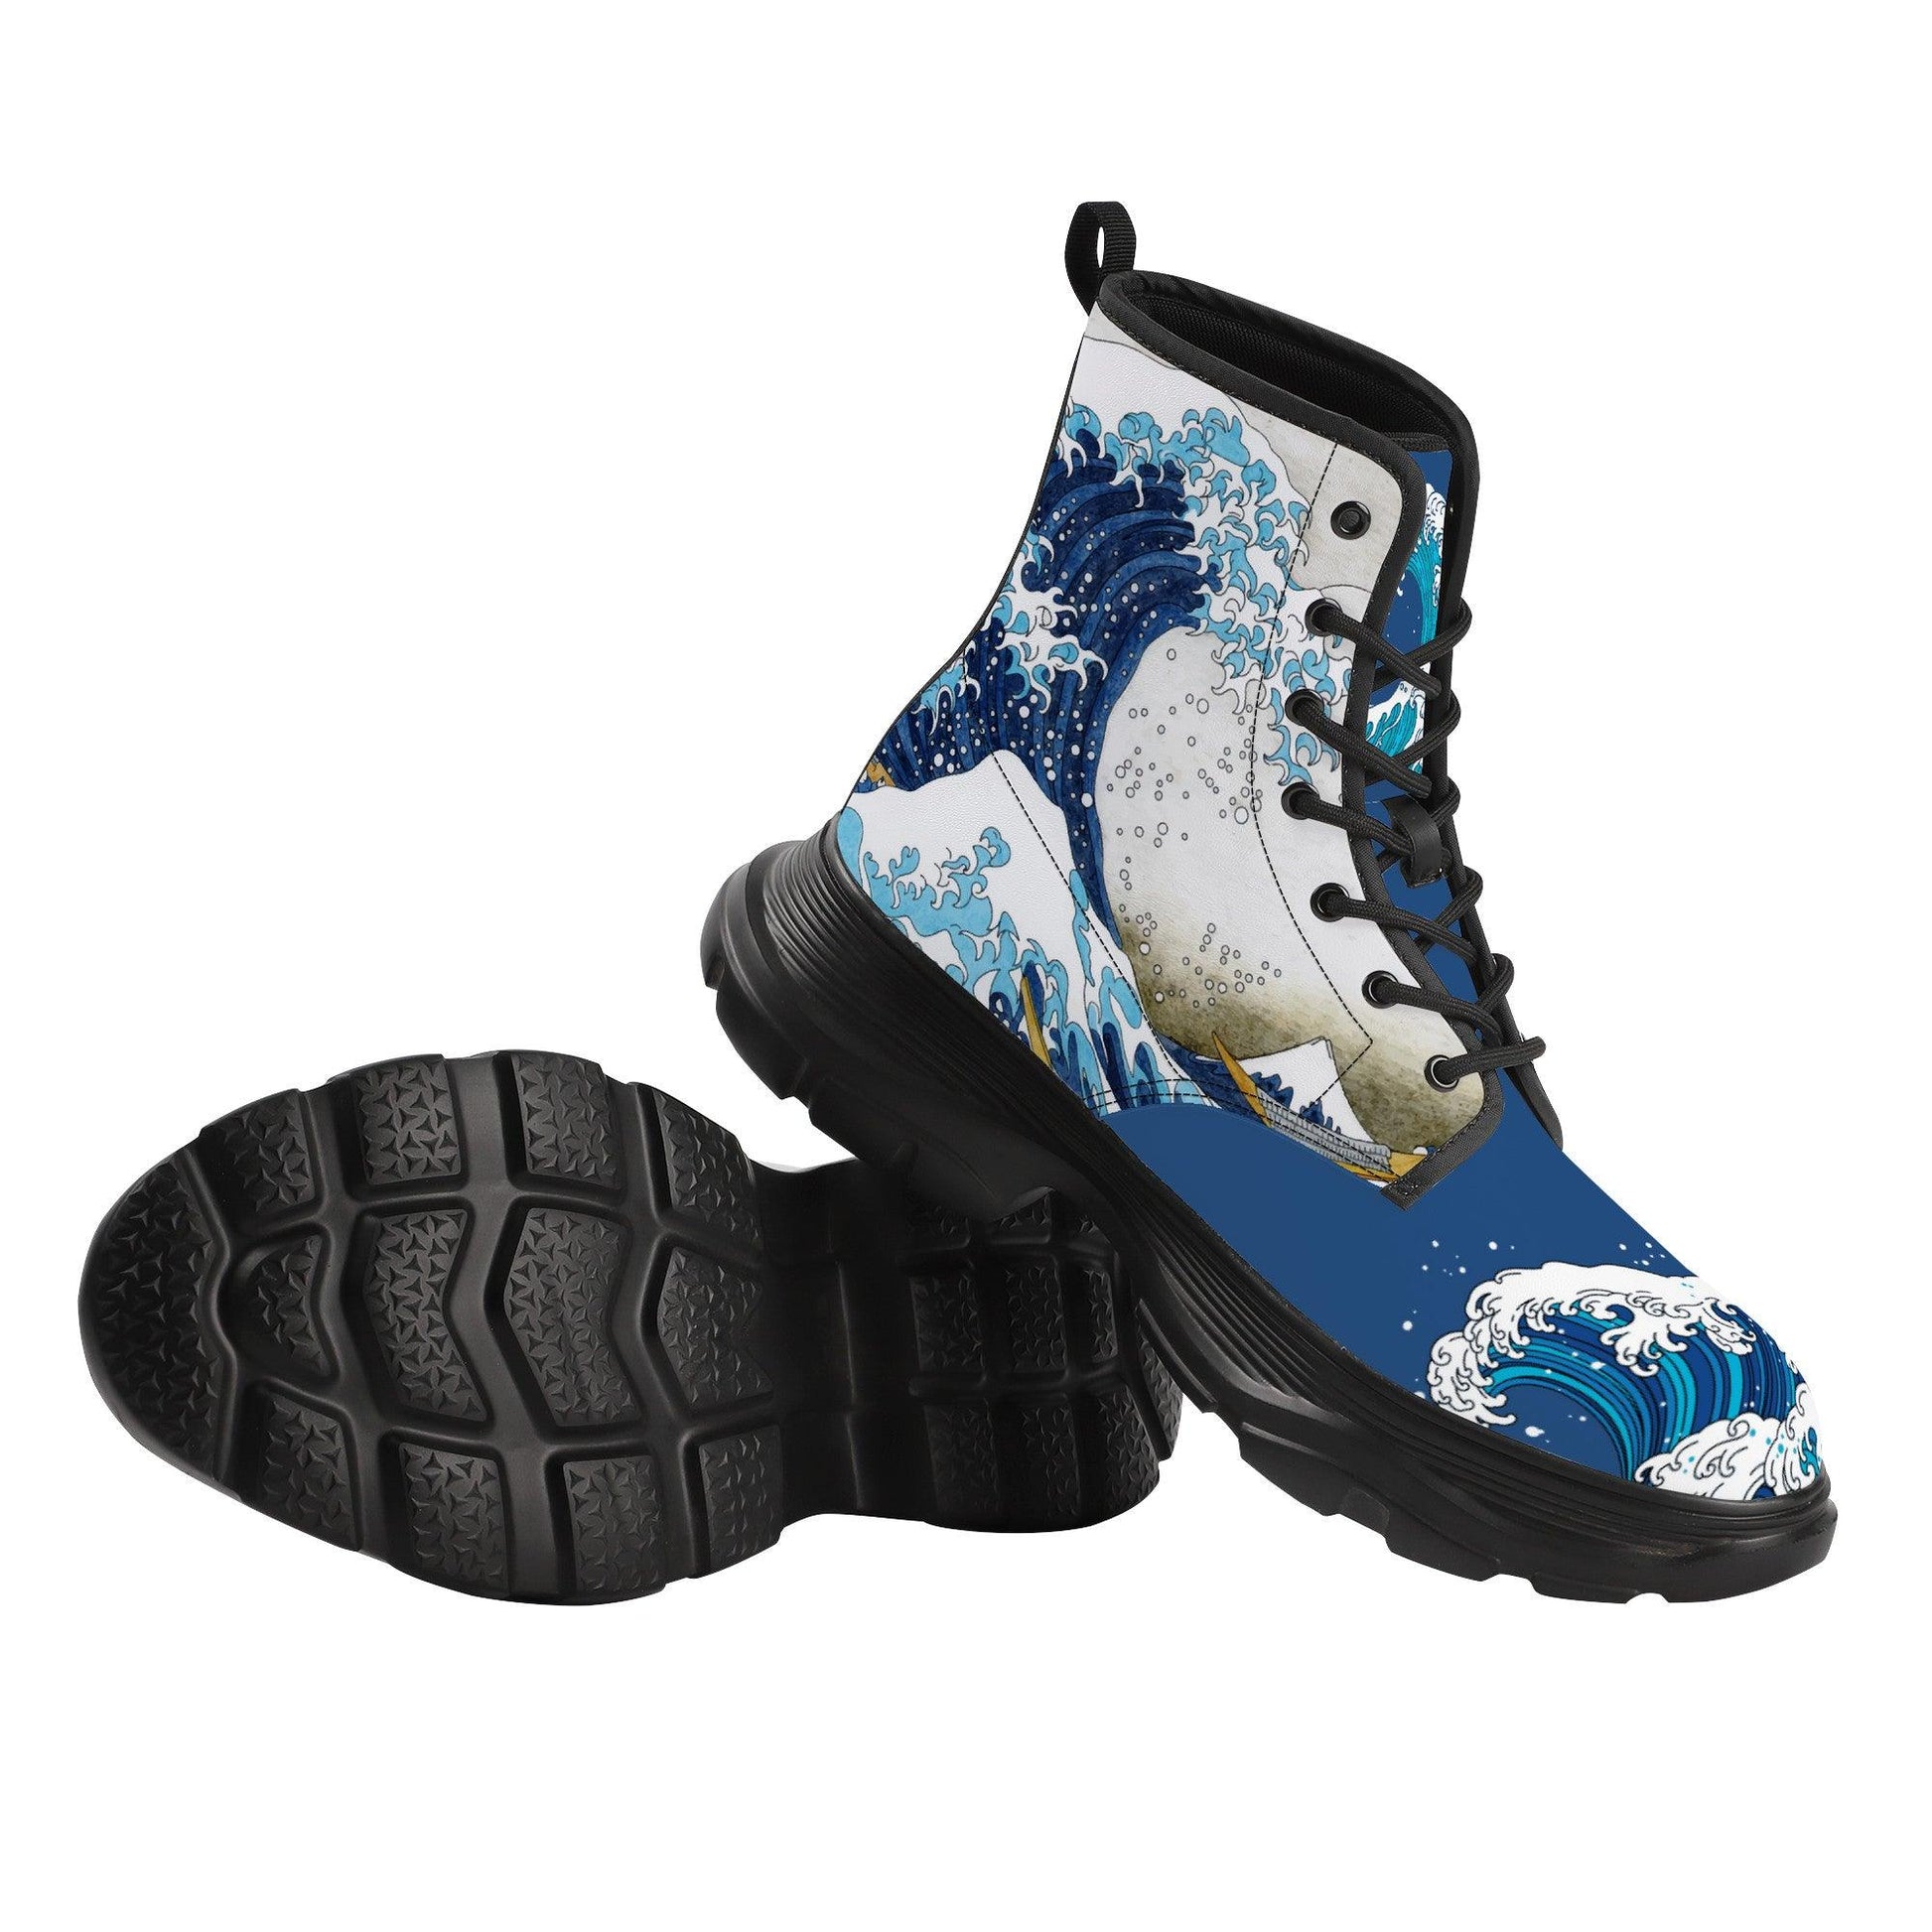 Under the Wave off Kanagawa (Kanagawa oki nami ura), also known as The Great Wave, from the series Thirty-six Views of Mount Fuji (Fugaku sanjūrokkei) by Katsushika Hokusai . Design applied on chunky boots with the dominant colour being royal blue. The waves paintings have been carefully placed on each of the sides of the boots